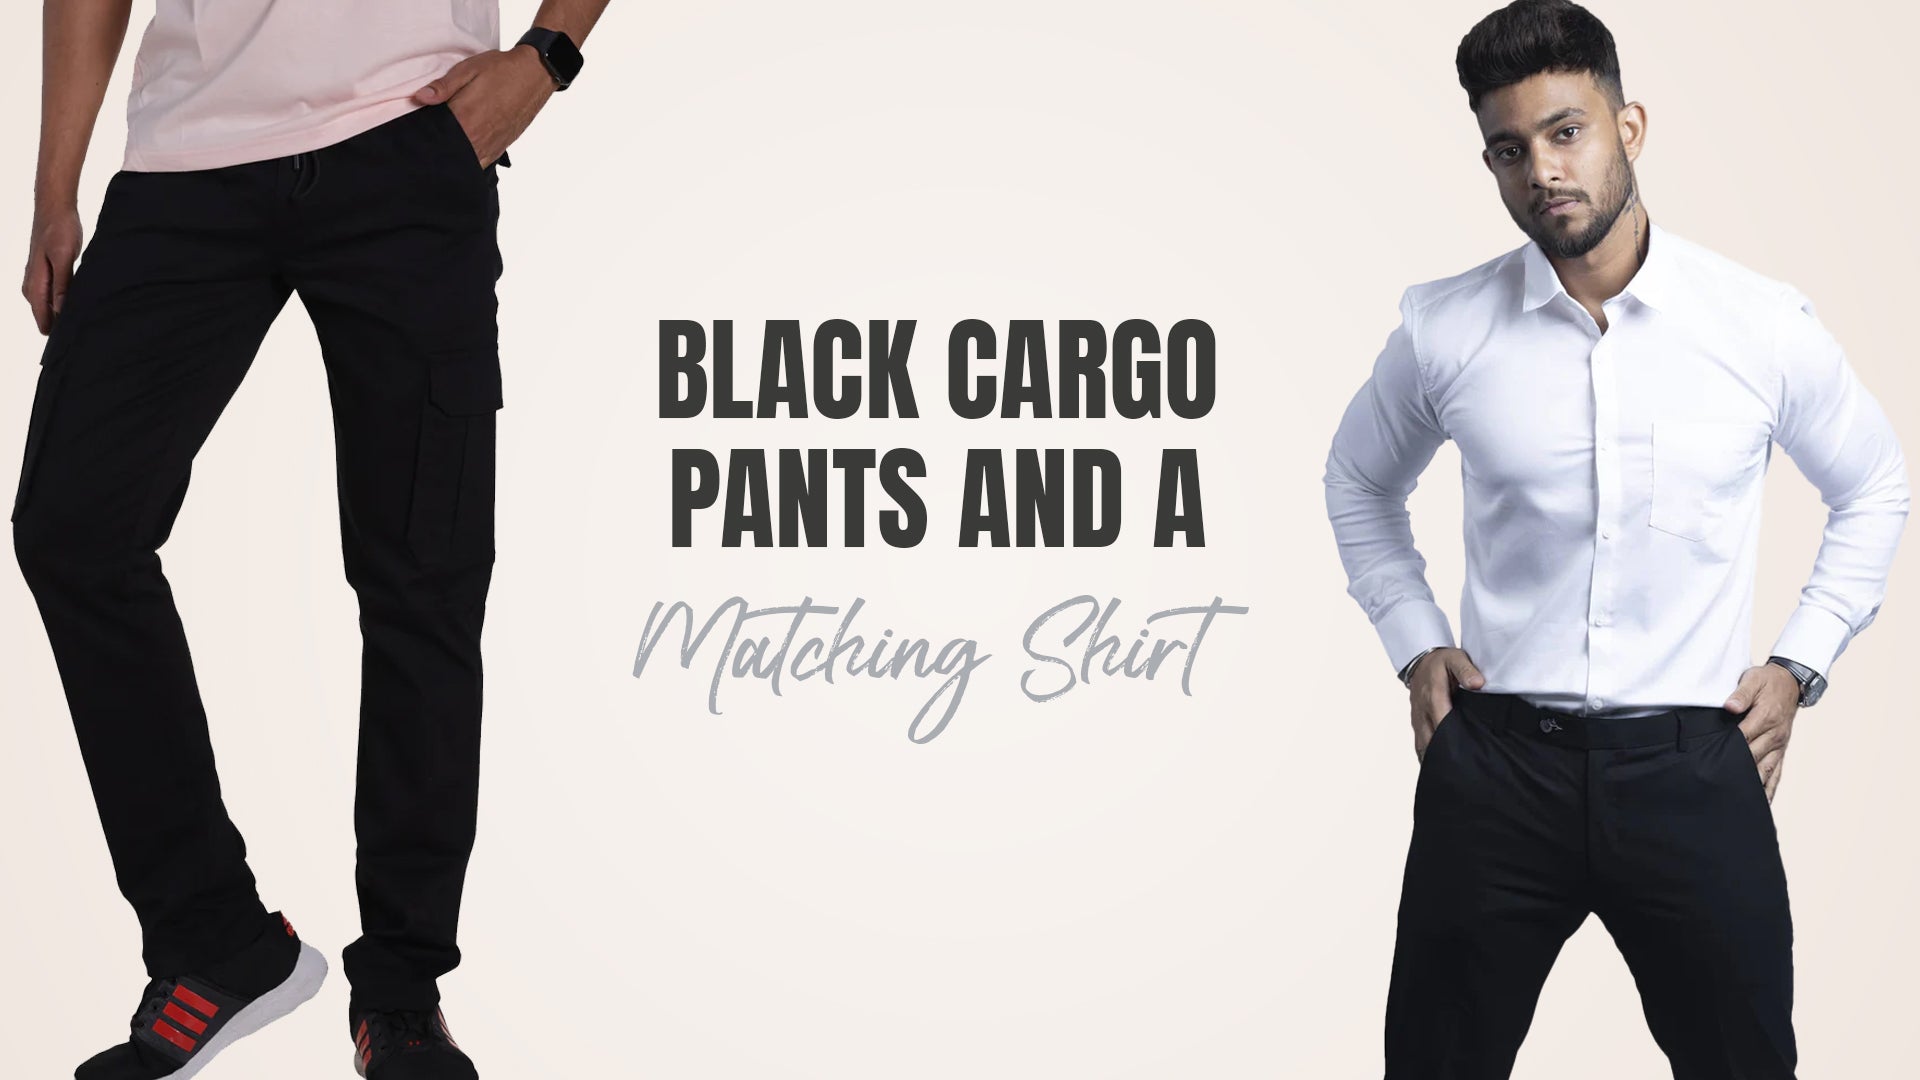 Do Black Pants Go With a Black Shirt? - Updated